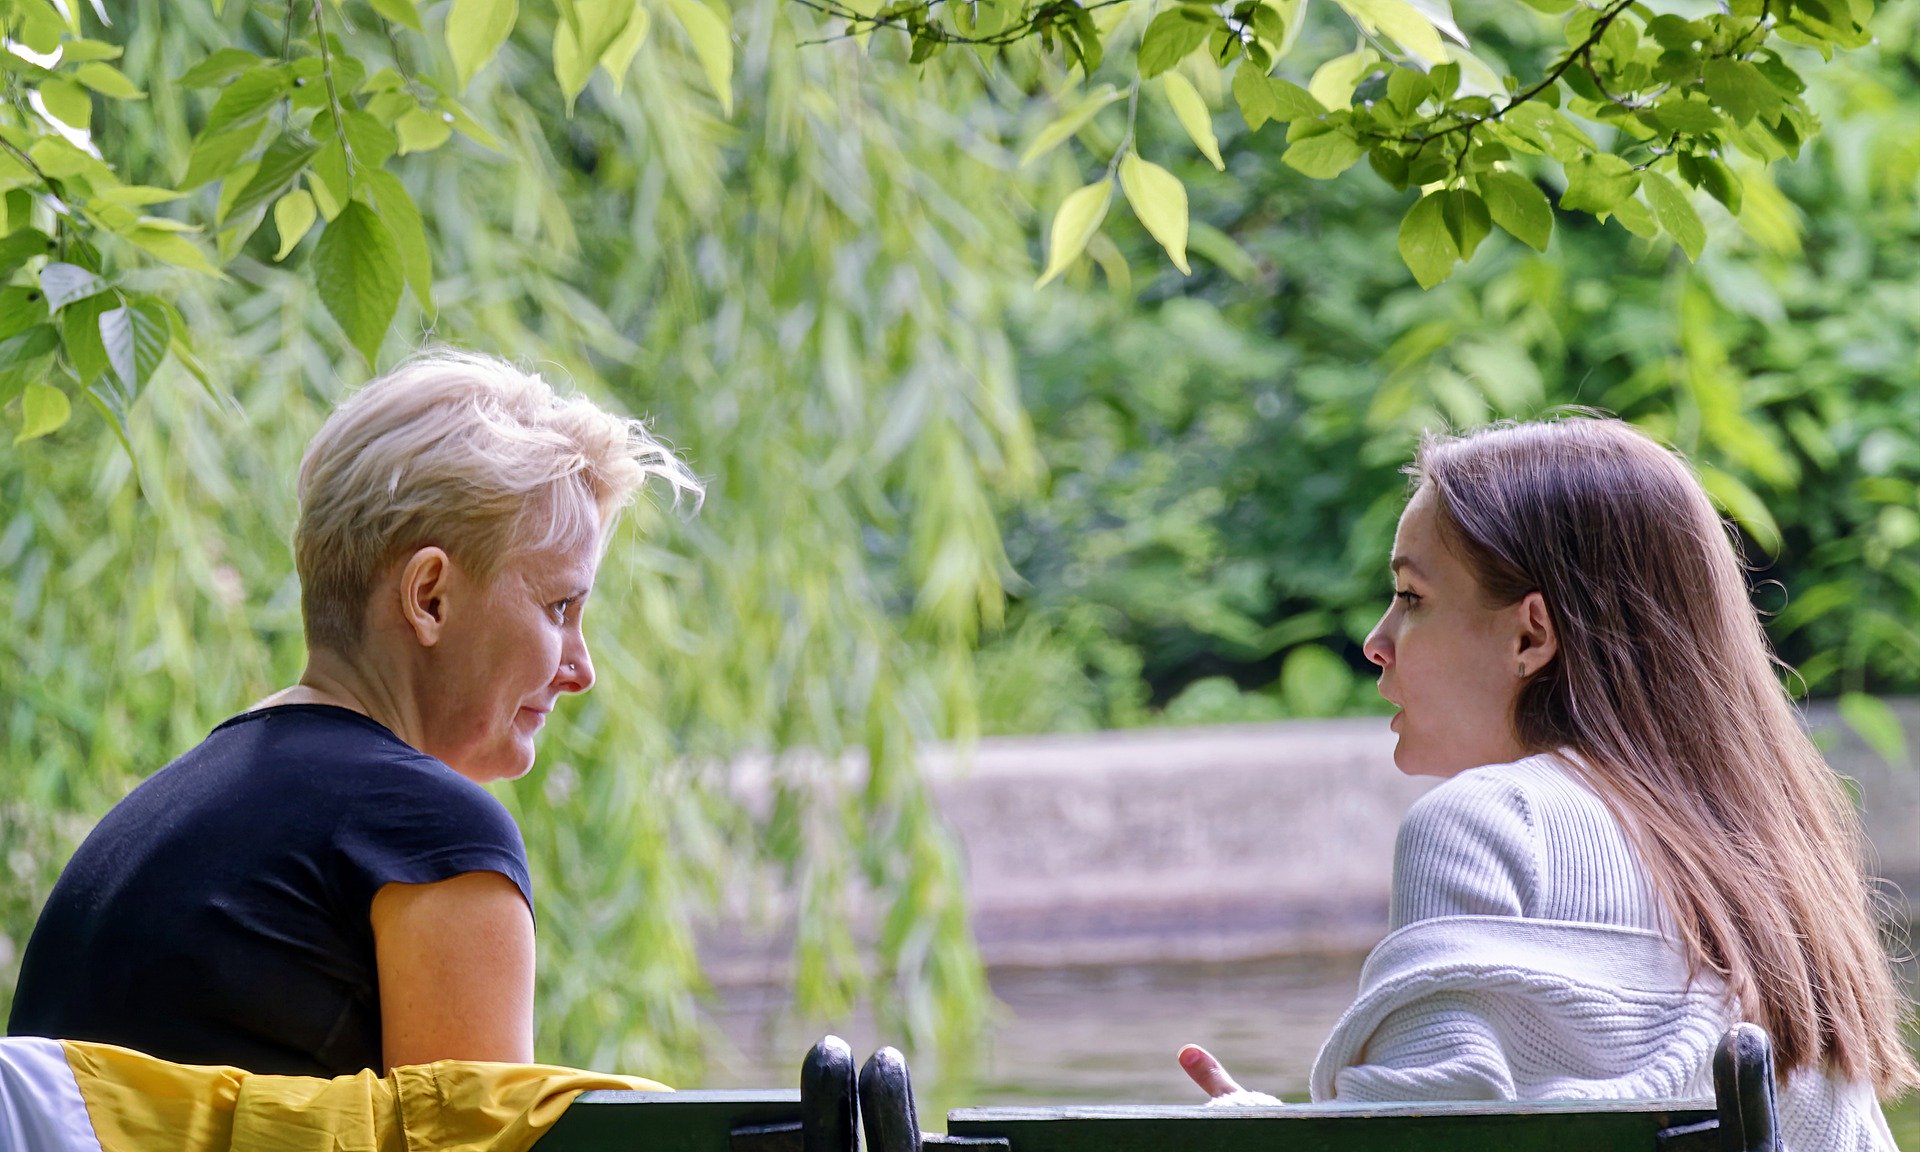 Older person talking to younger person outside under trees